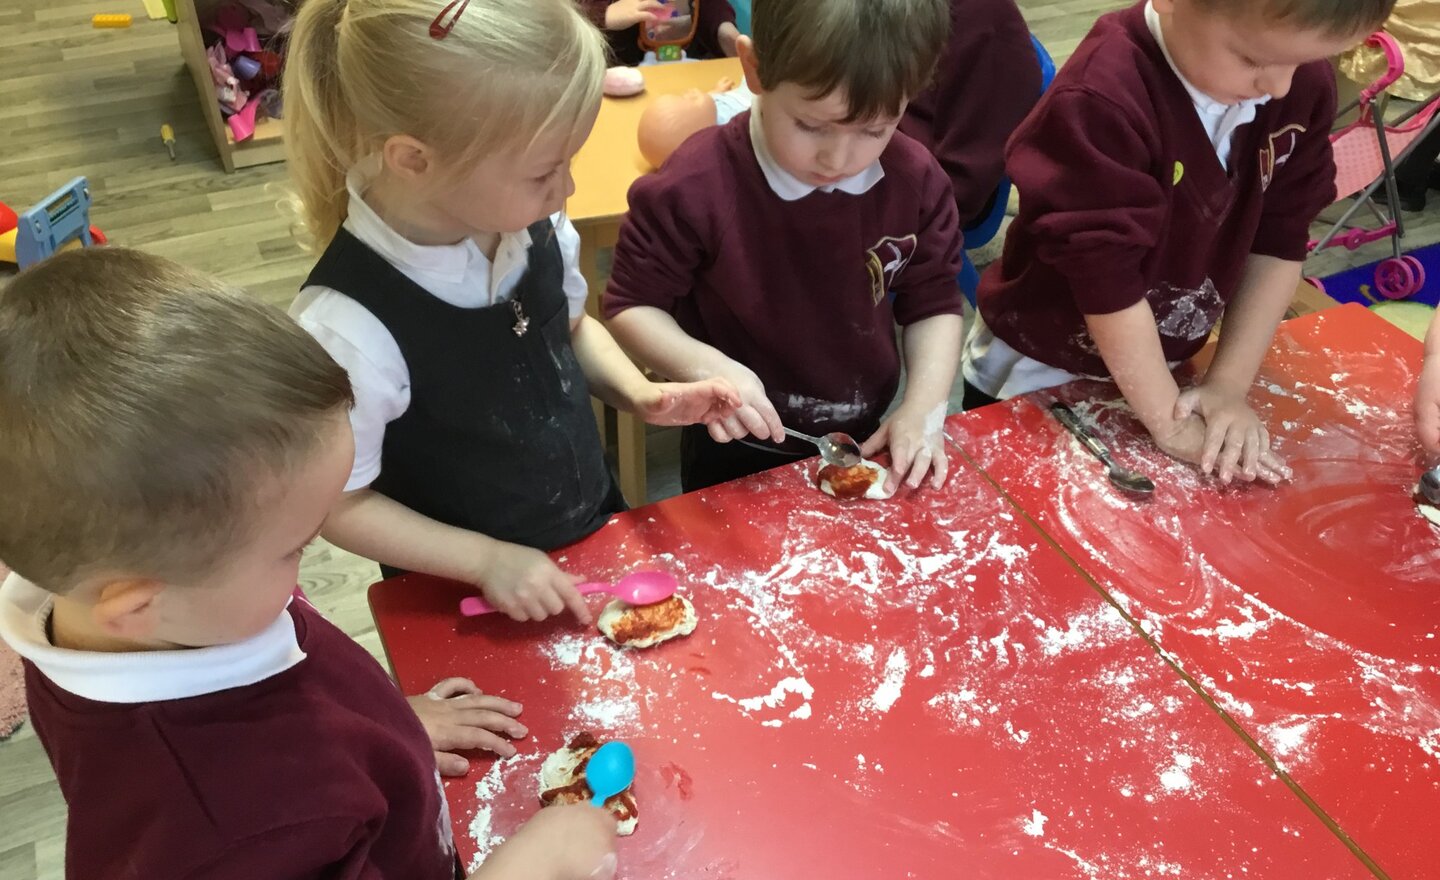 Image of Pizza making in Nursery